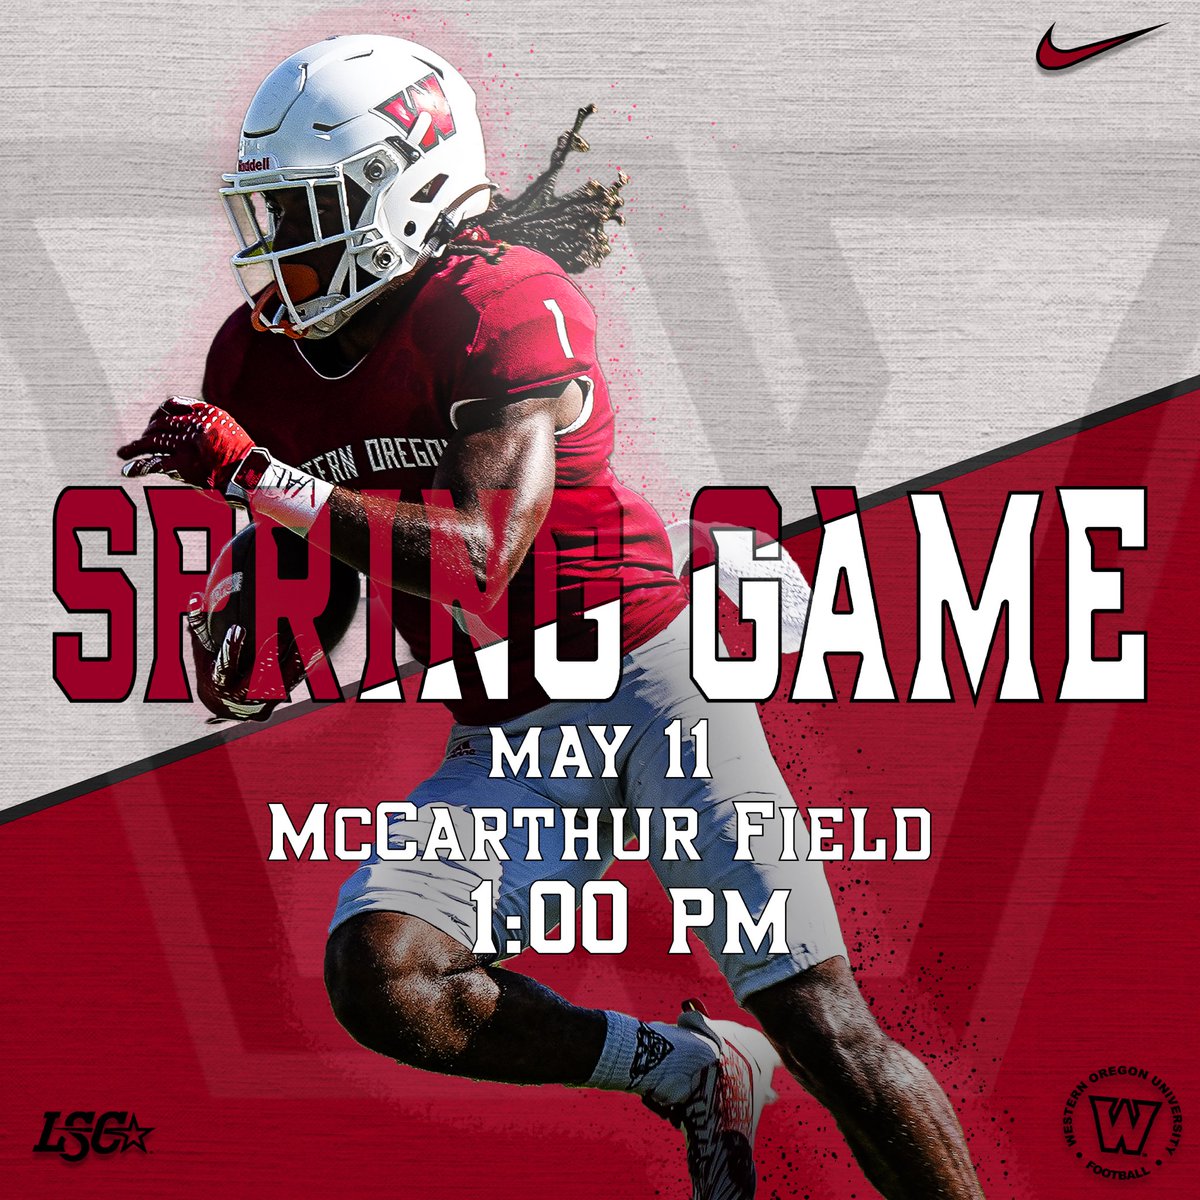 ITS TIME‼️ Saturday, May 11th @ 1pm. Hope to see you there‼️ #gowolves #wolvesup #WOU